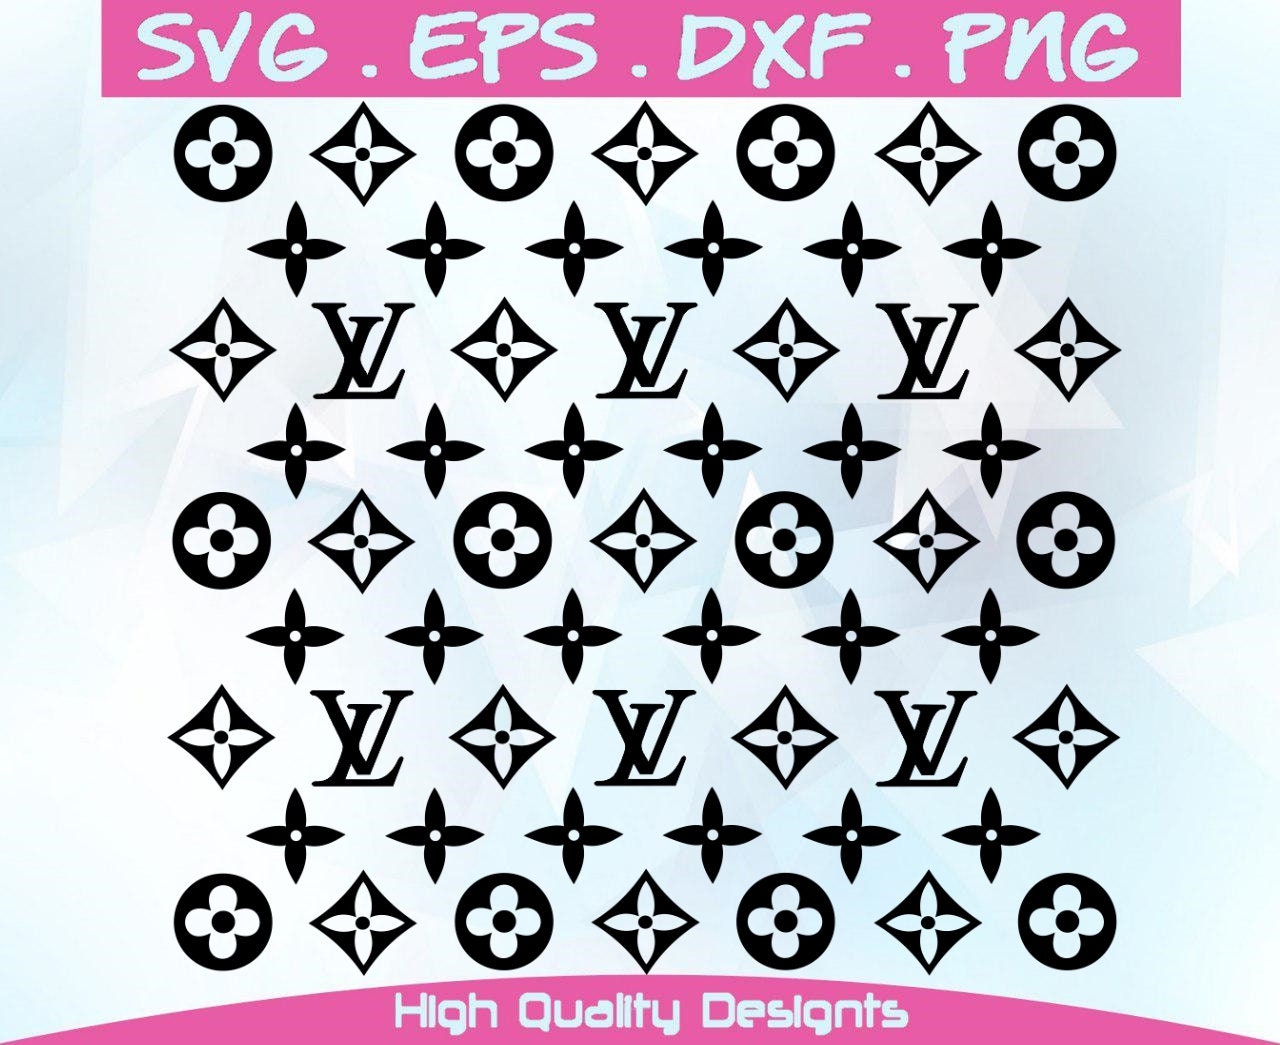 INSPIRED BY Louis vuitton Svg Dxf Eps Png Cut File | Etsy